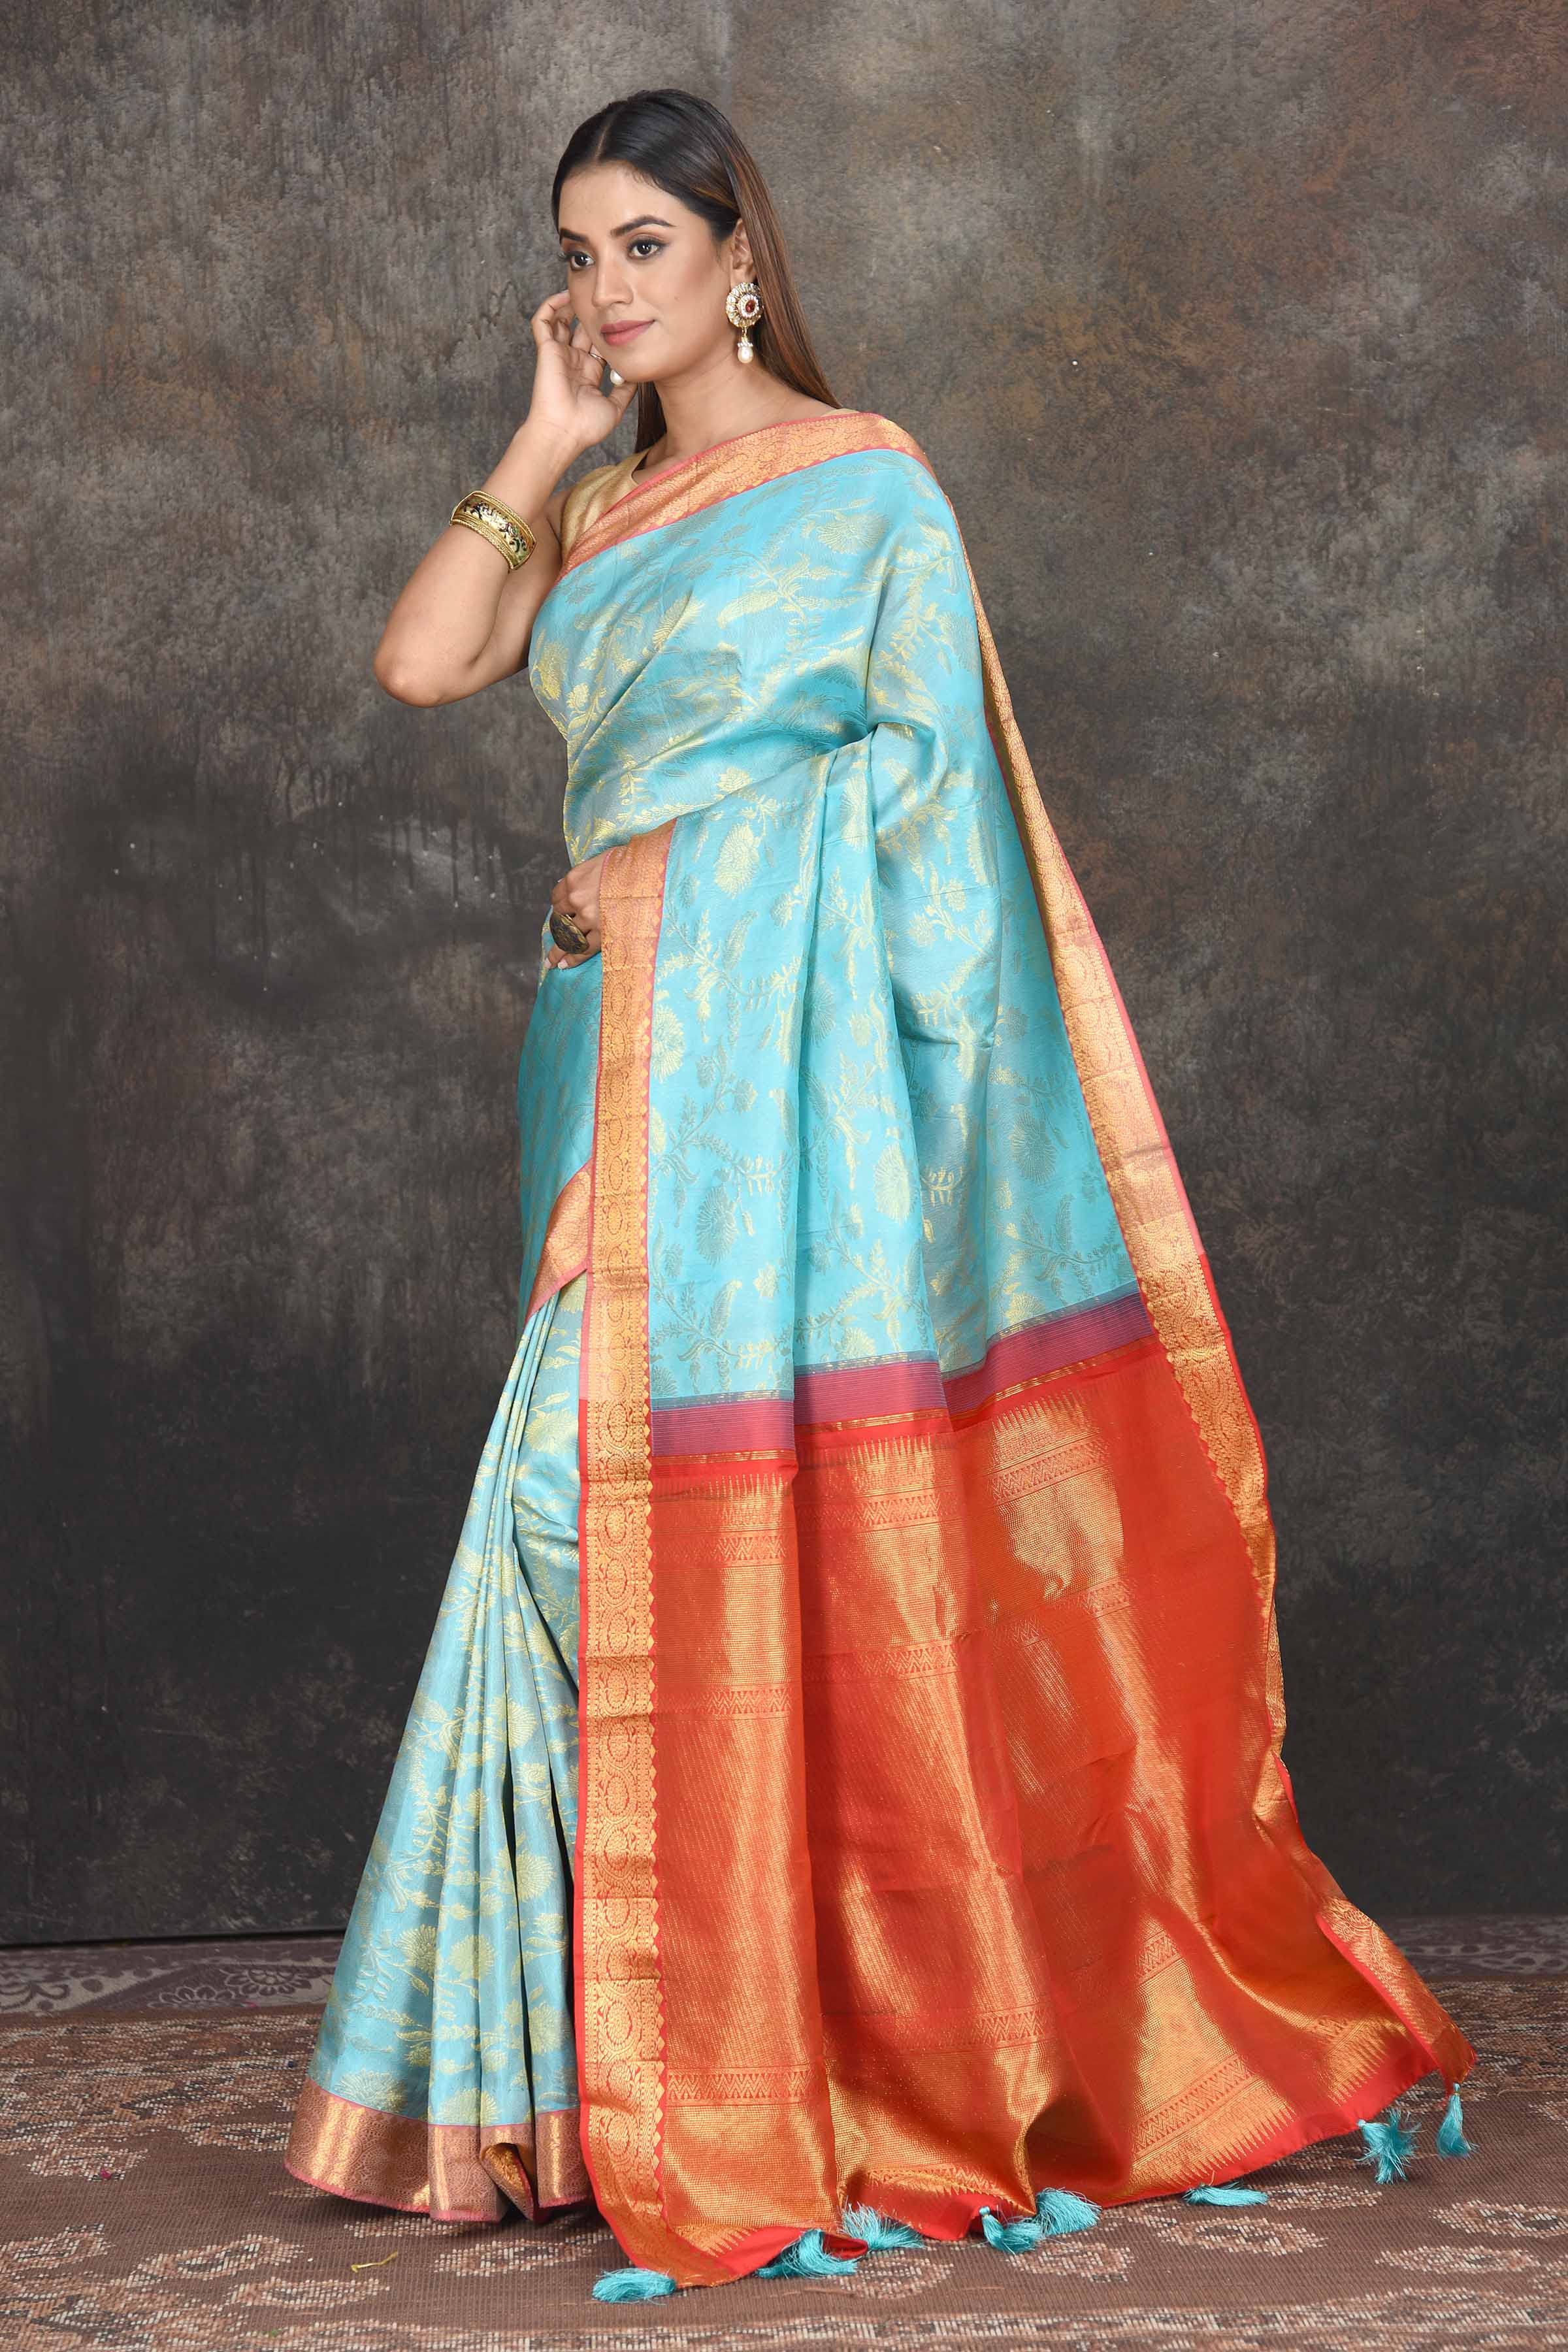 Buy light blue Kanjeevaram brocade sari online in USA with red zari border. Be the center of attraction on special occasions in ethnic sarees, designer sarees, embroidered sarees, handwoven sarees, pure silk sarees from Pure Elegance Indian saree store in USA.-pallu